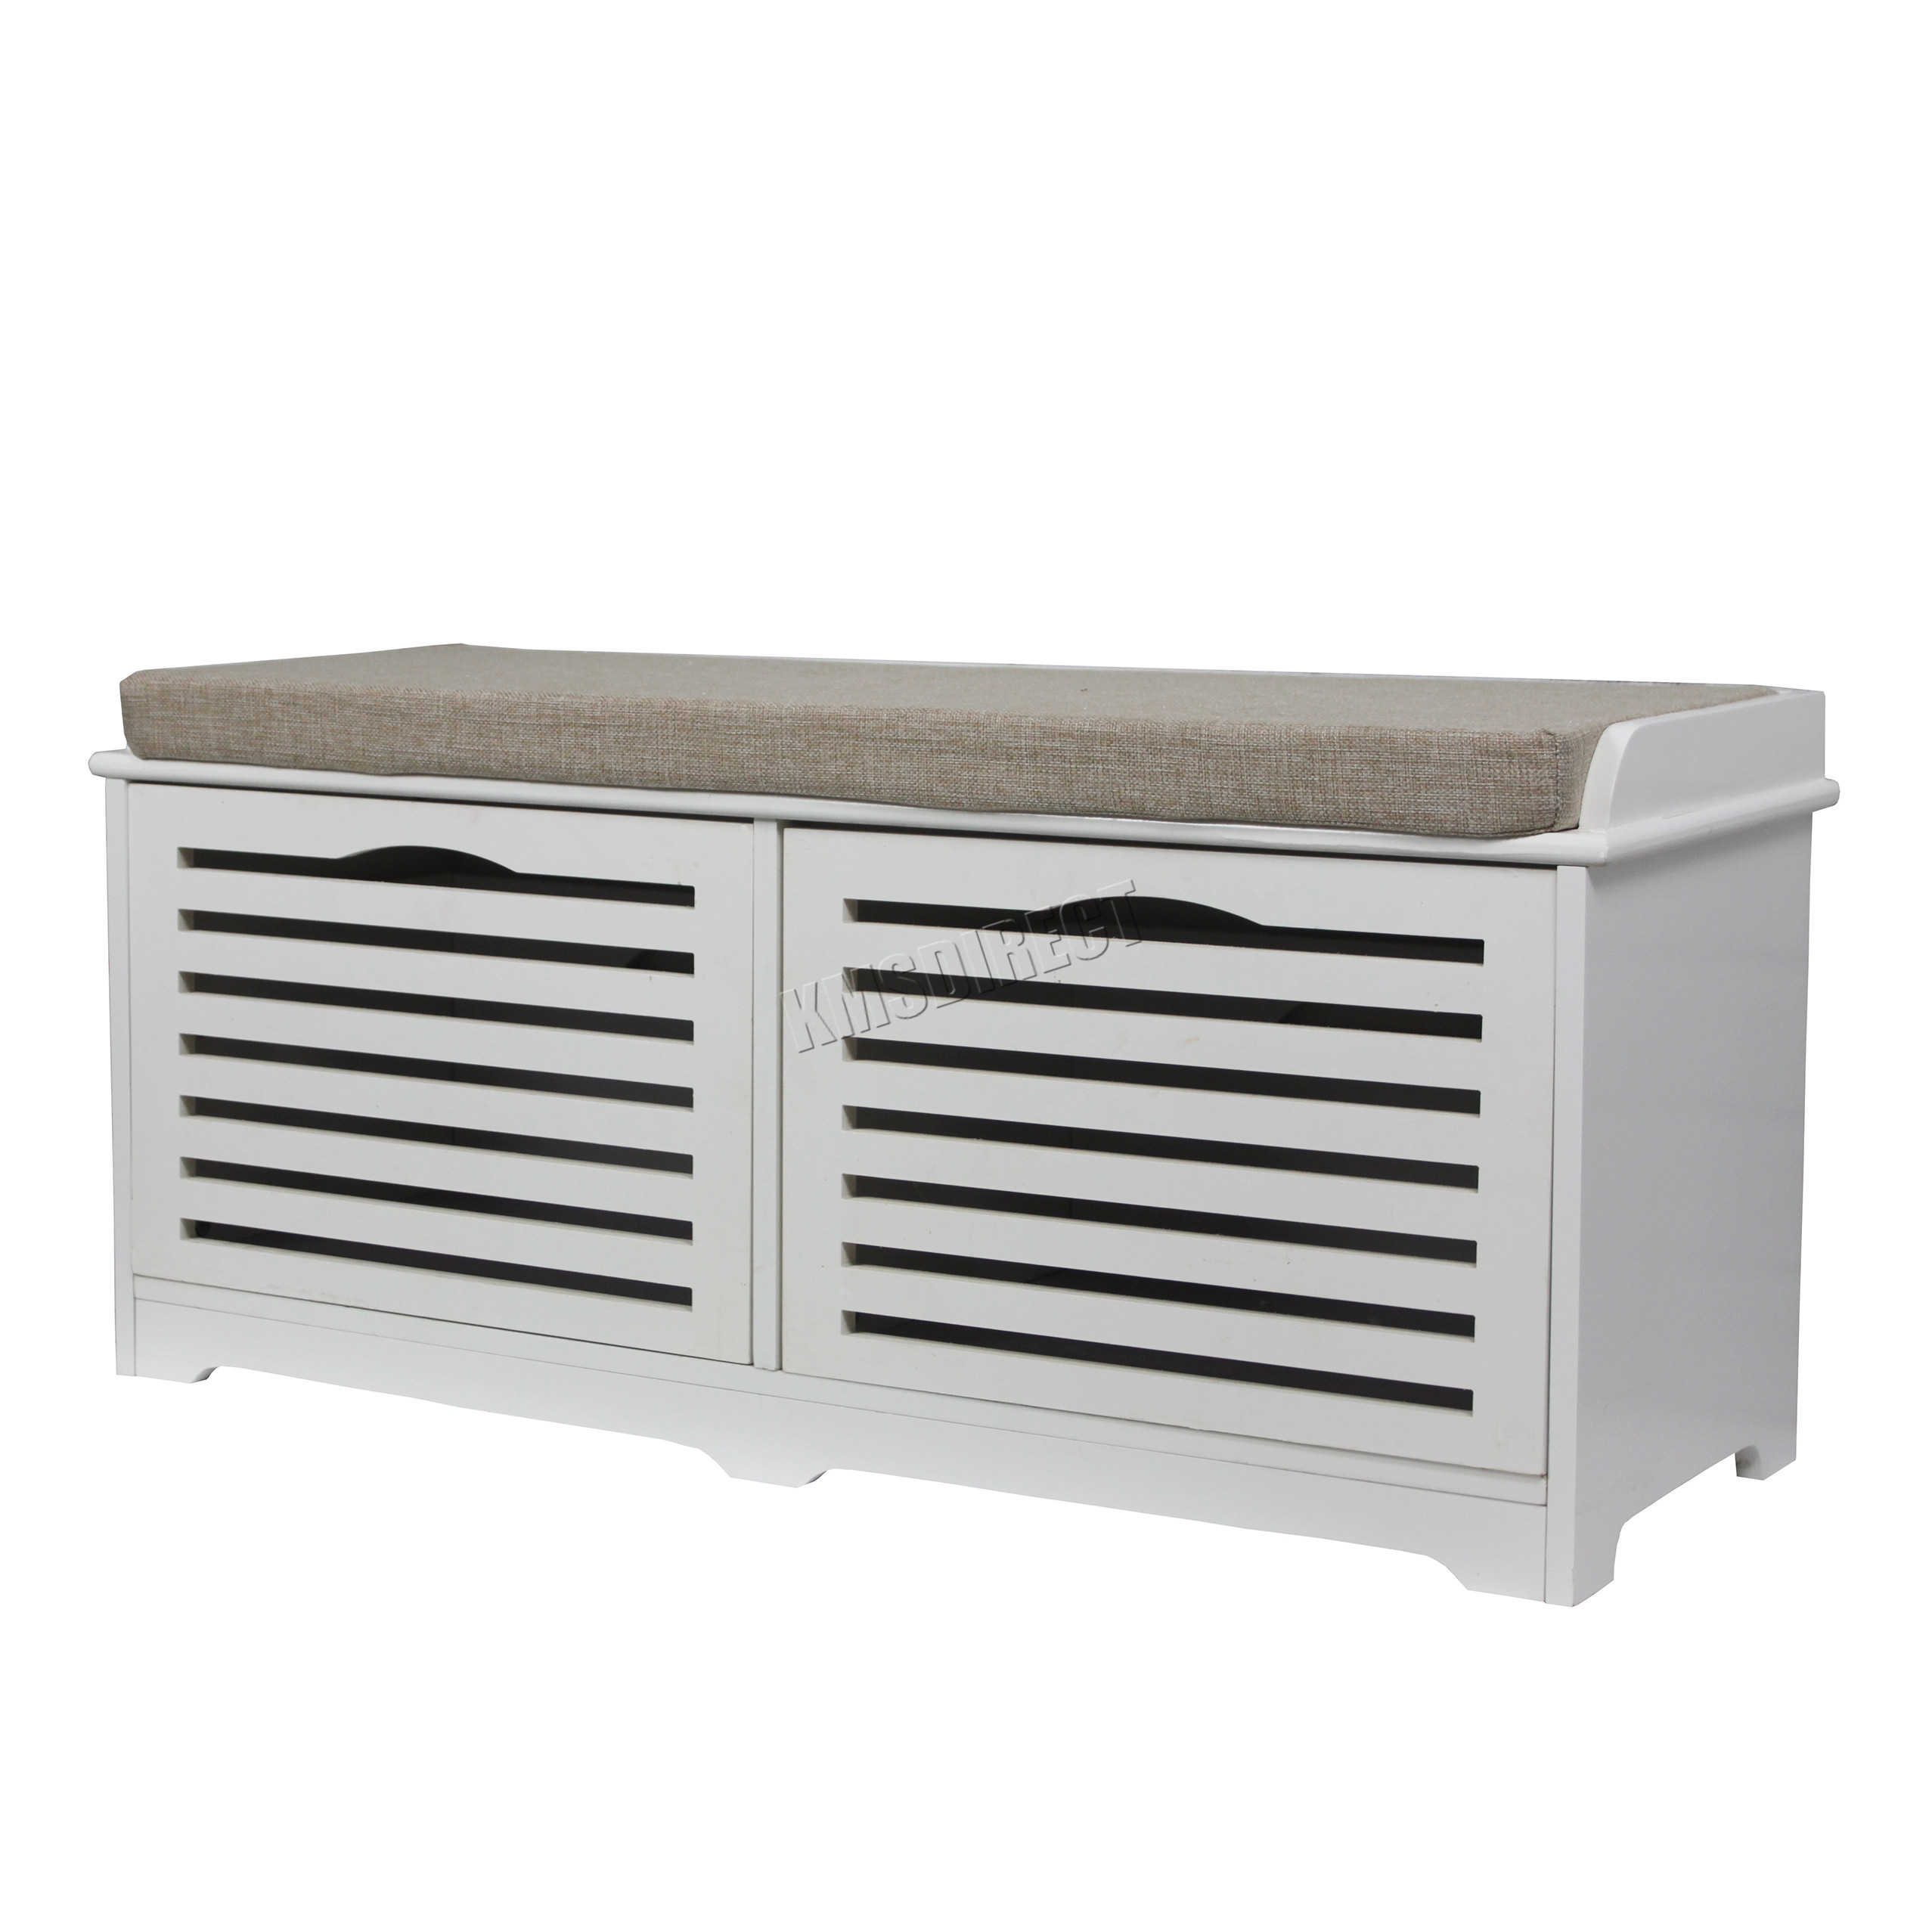 White Storage Bench With Drawers
 FoxHunter Shoe Storage Bench With Drawers Padded Seat